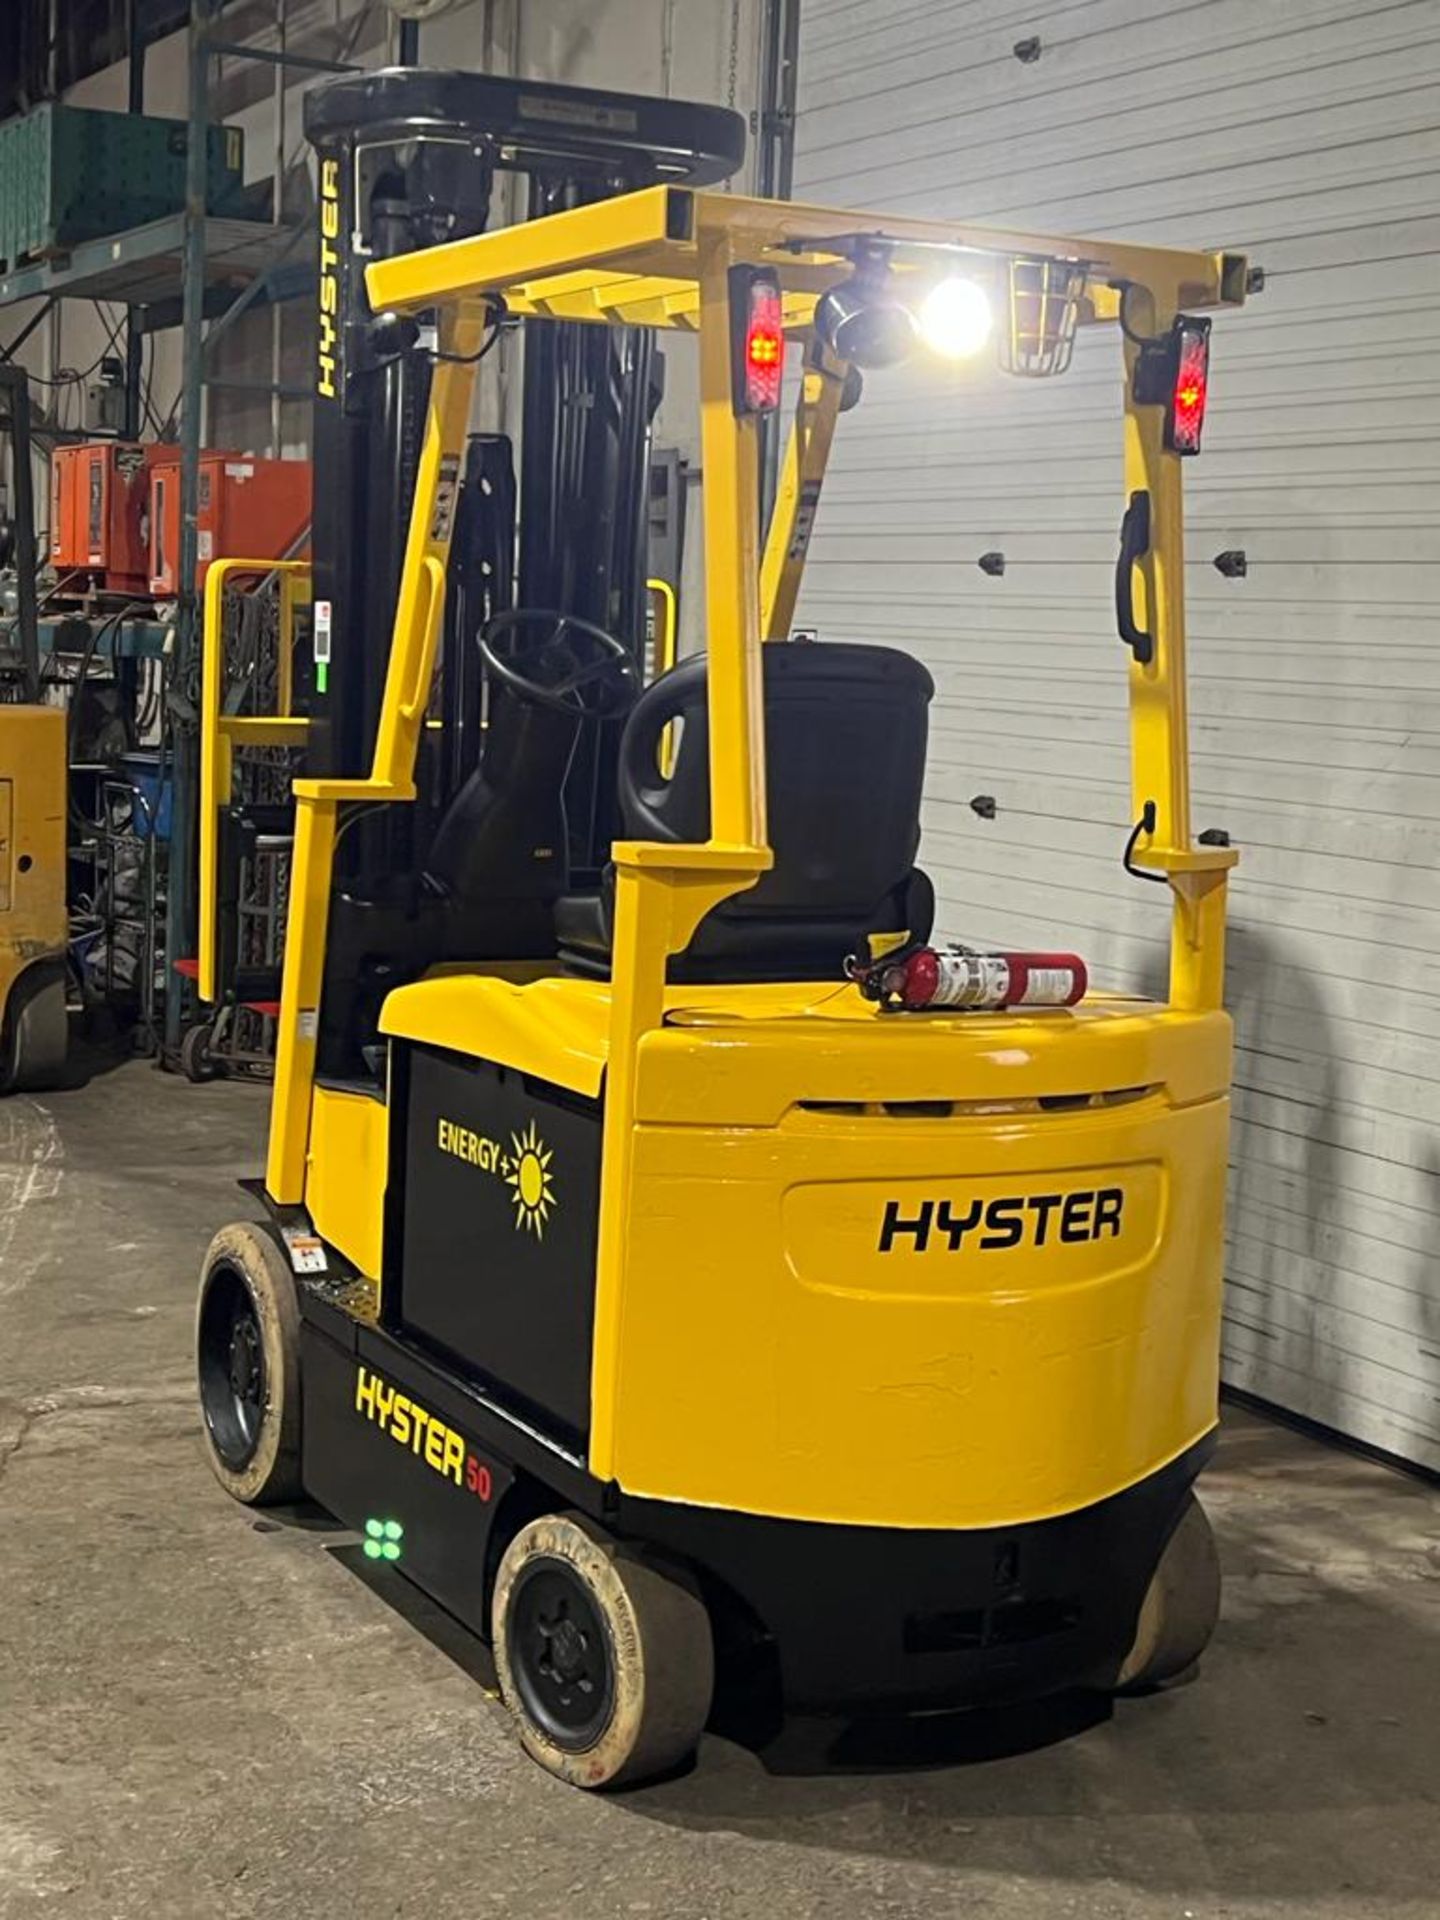 2018 Hyster 5,000lbs Capacity Forklift Electric with 48V Battery & 4-STAGE MAST with Sideshift - Image 3 of 4